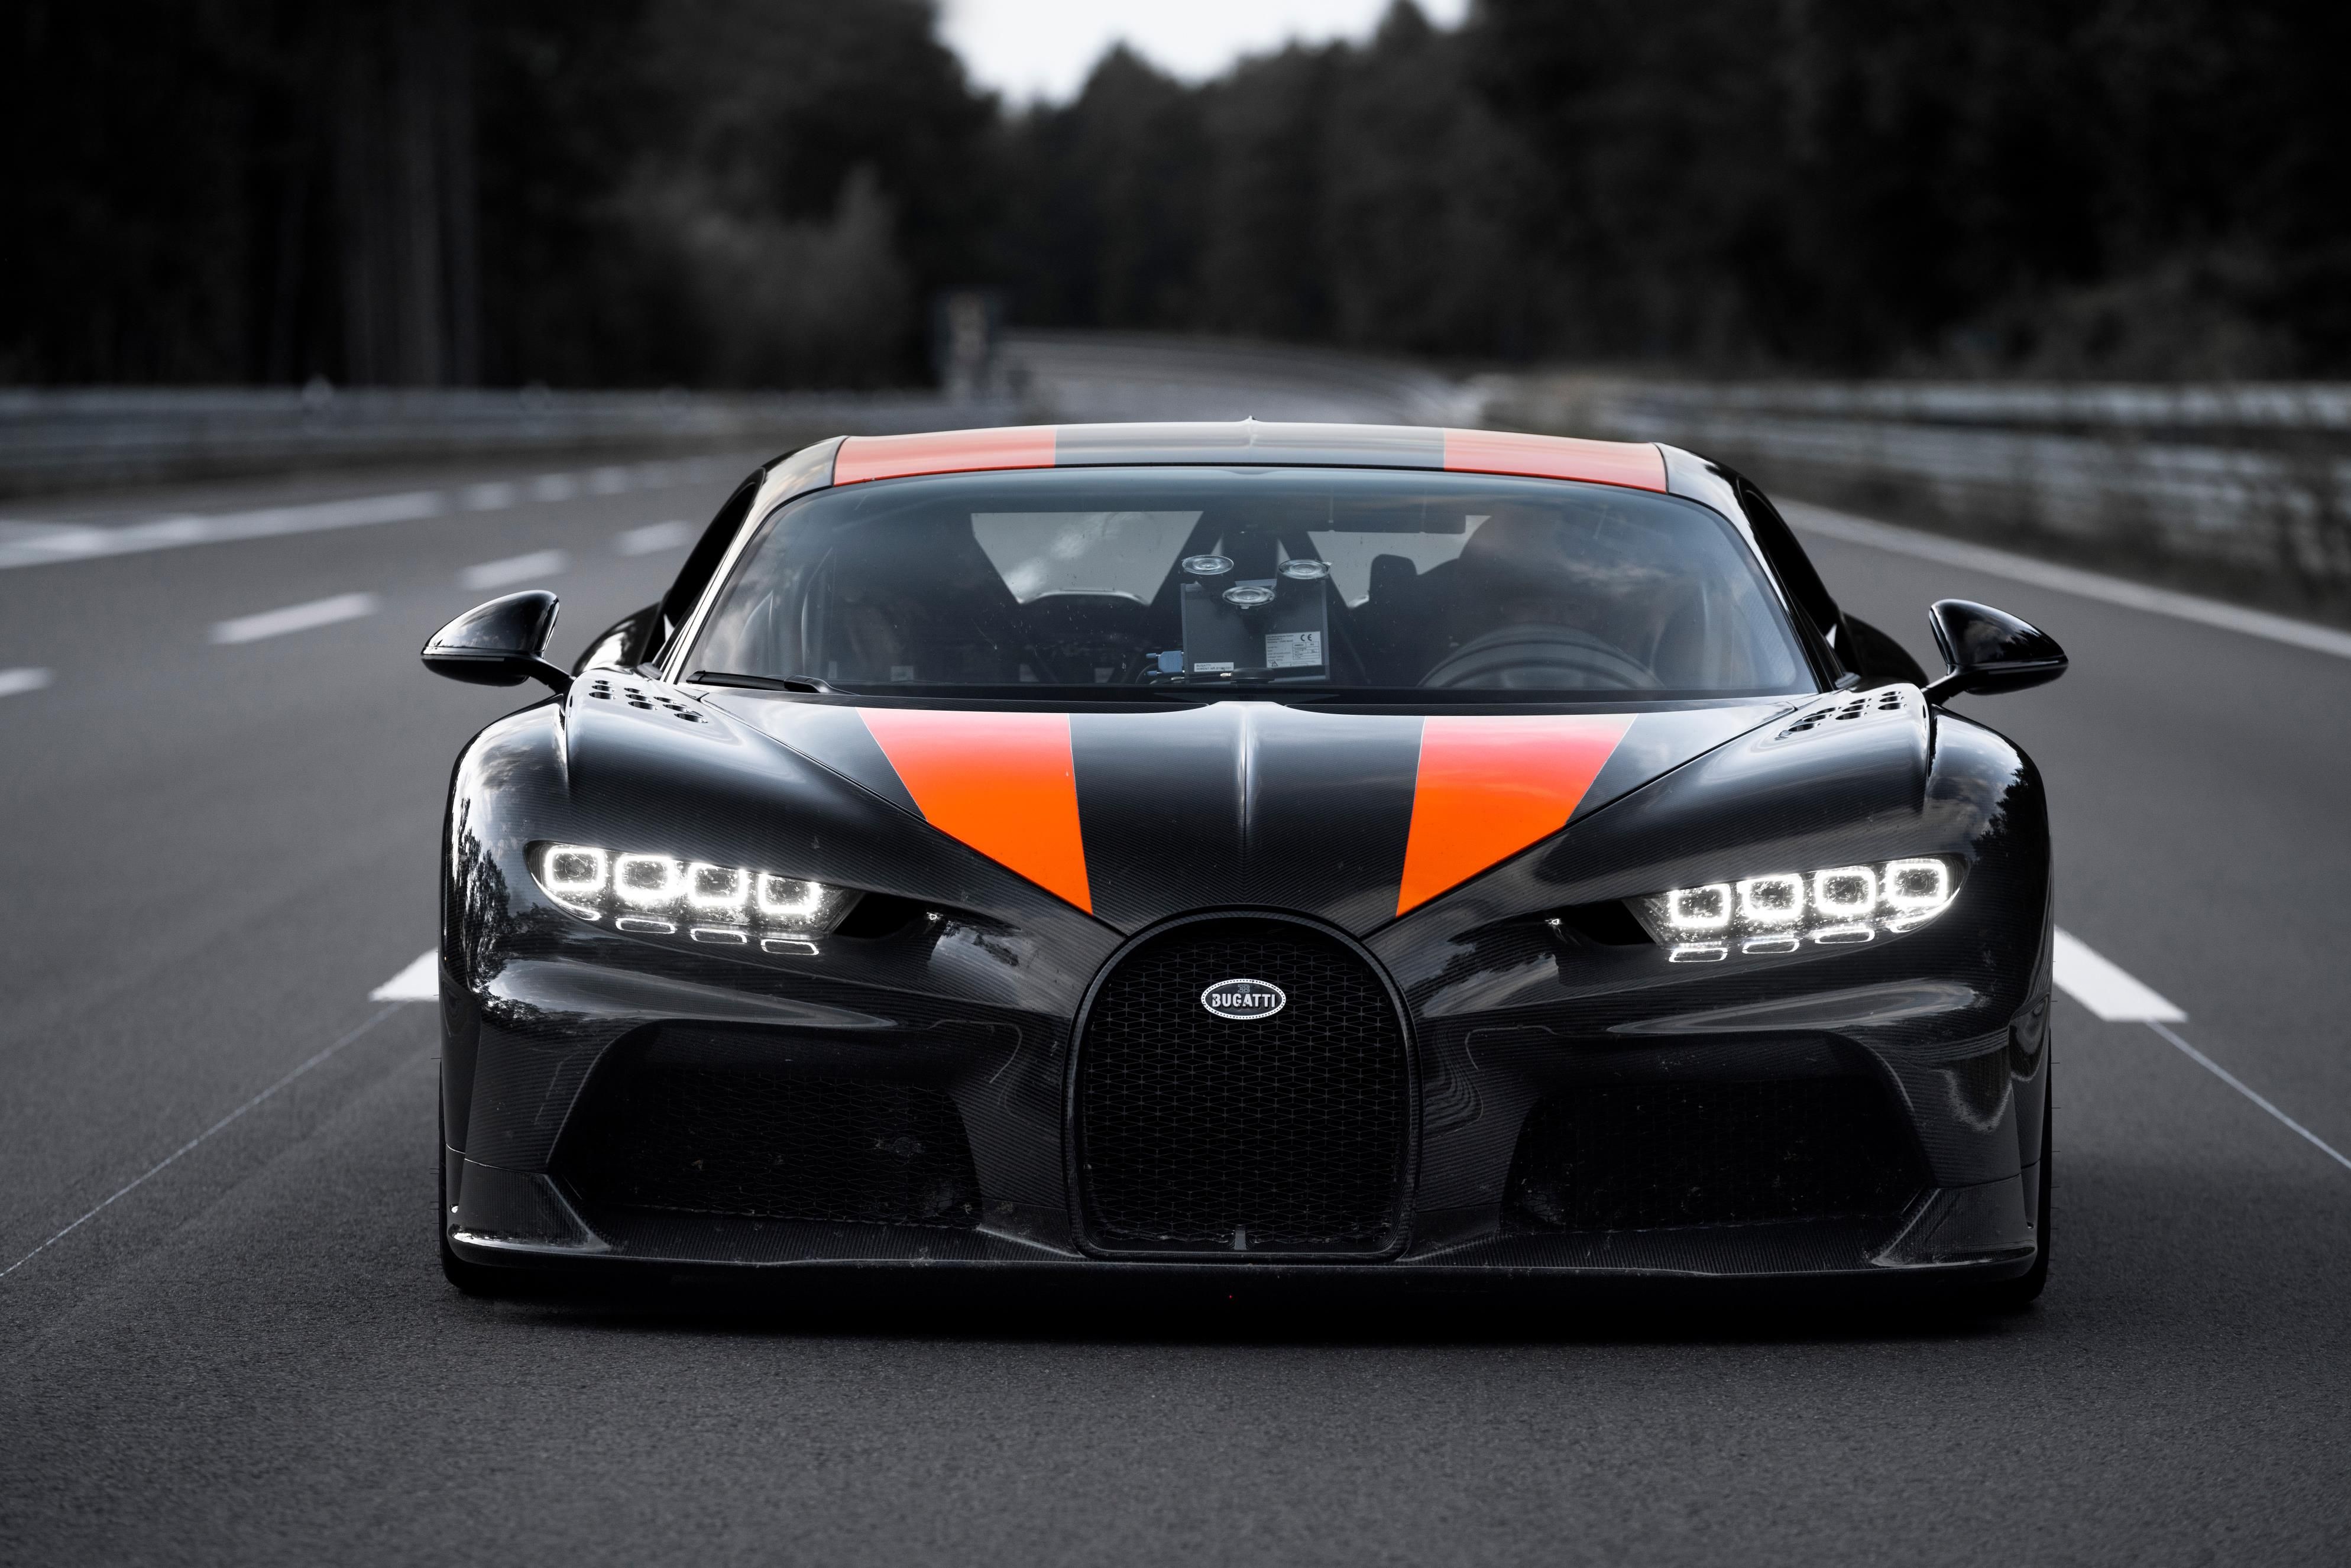 Bugatti debuts 'normal' Chiron Super Sport with 273-mph top speed - CNET